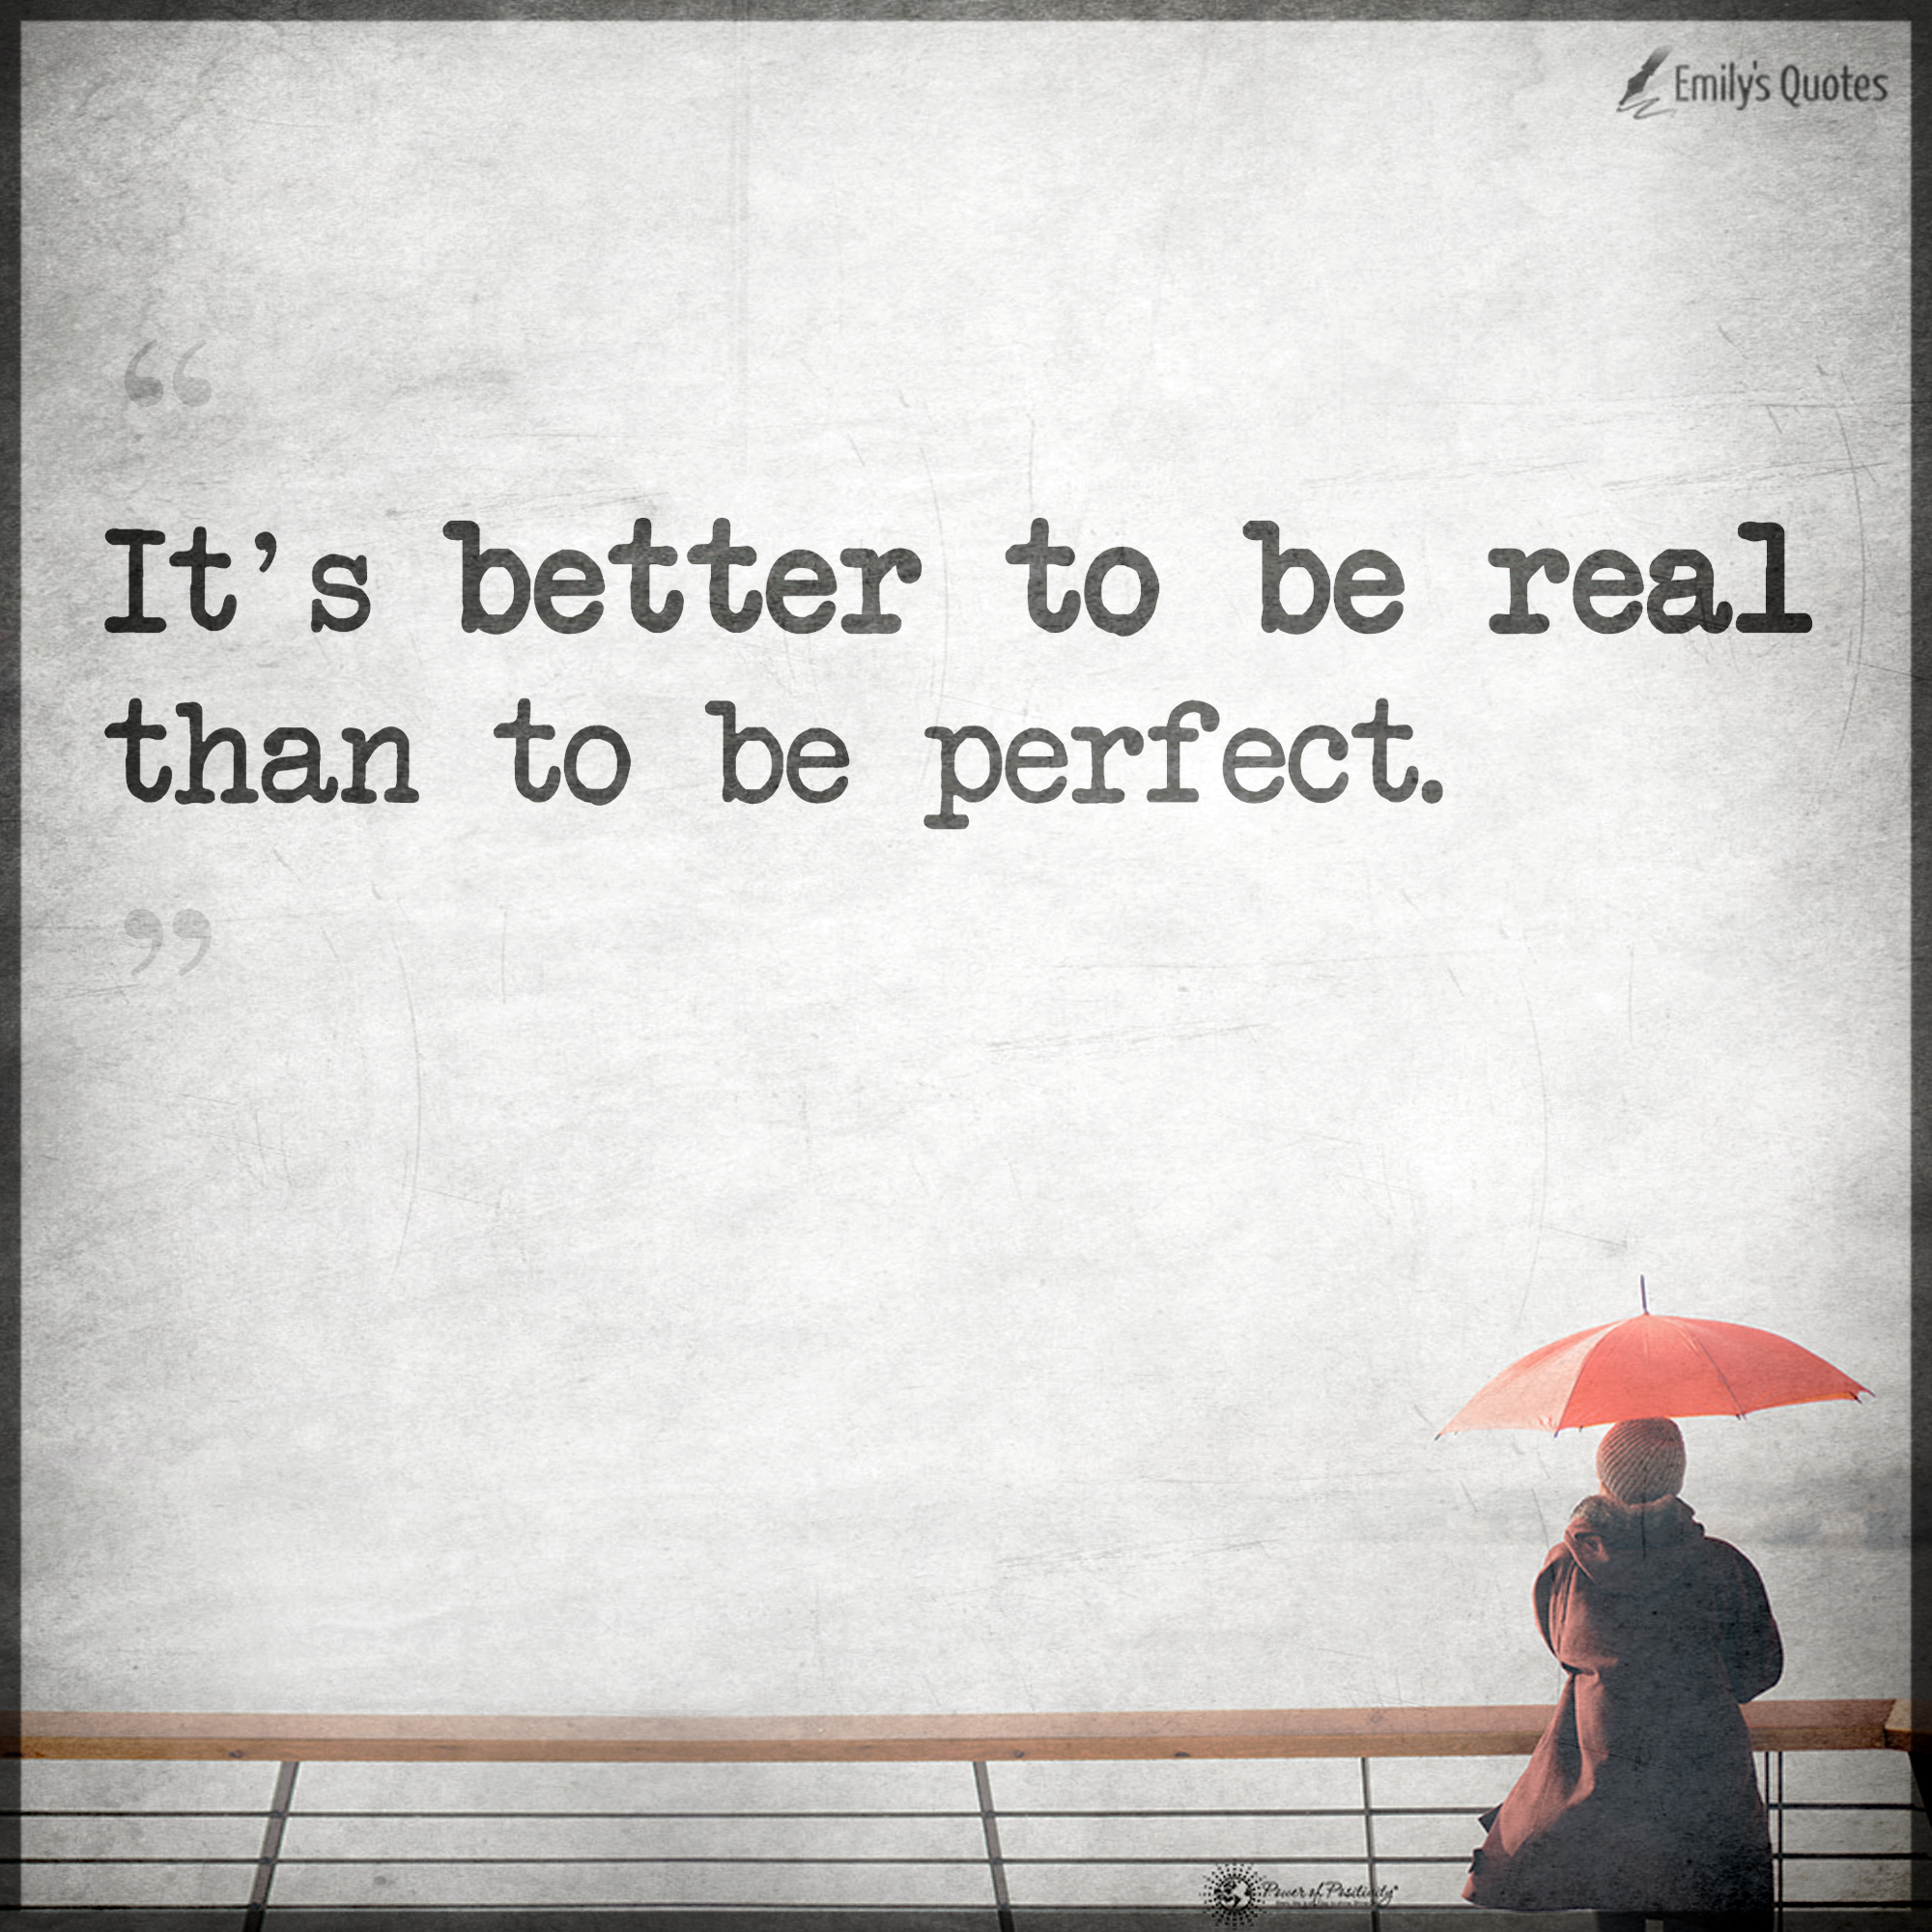 It’s better to be real than to be perfect